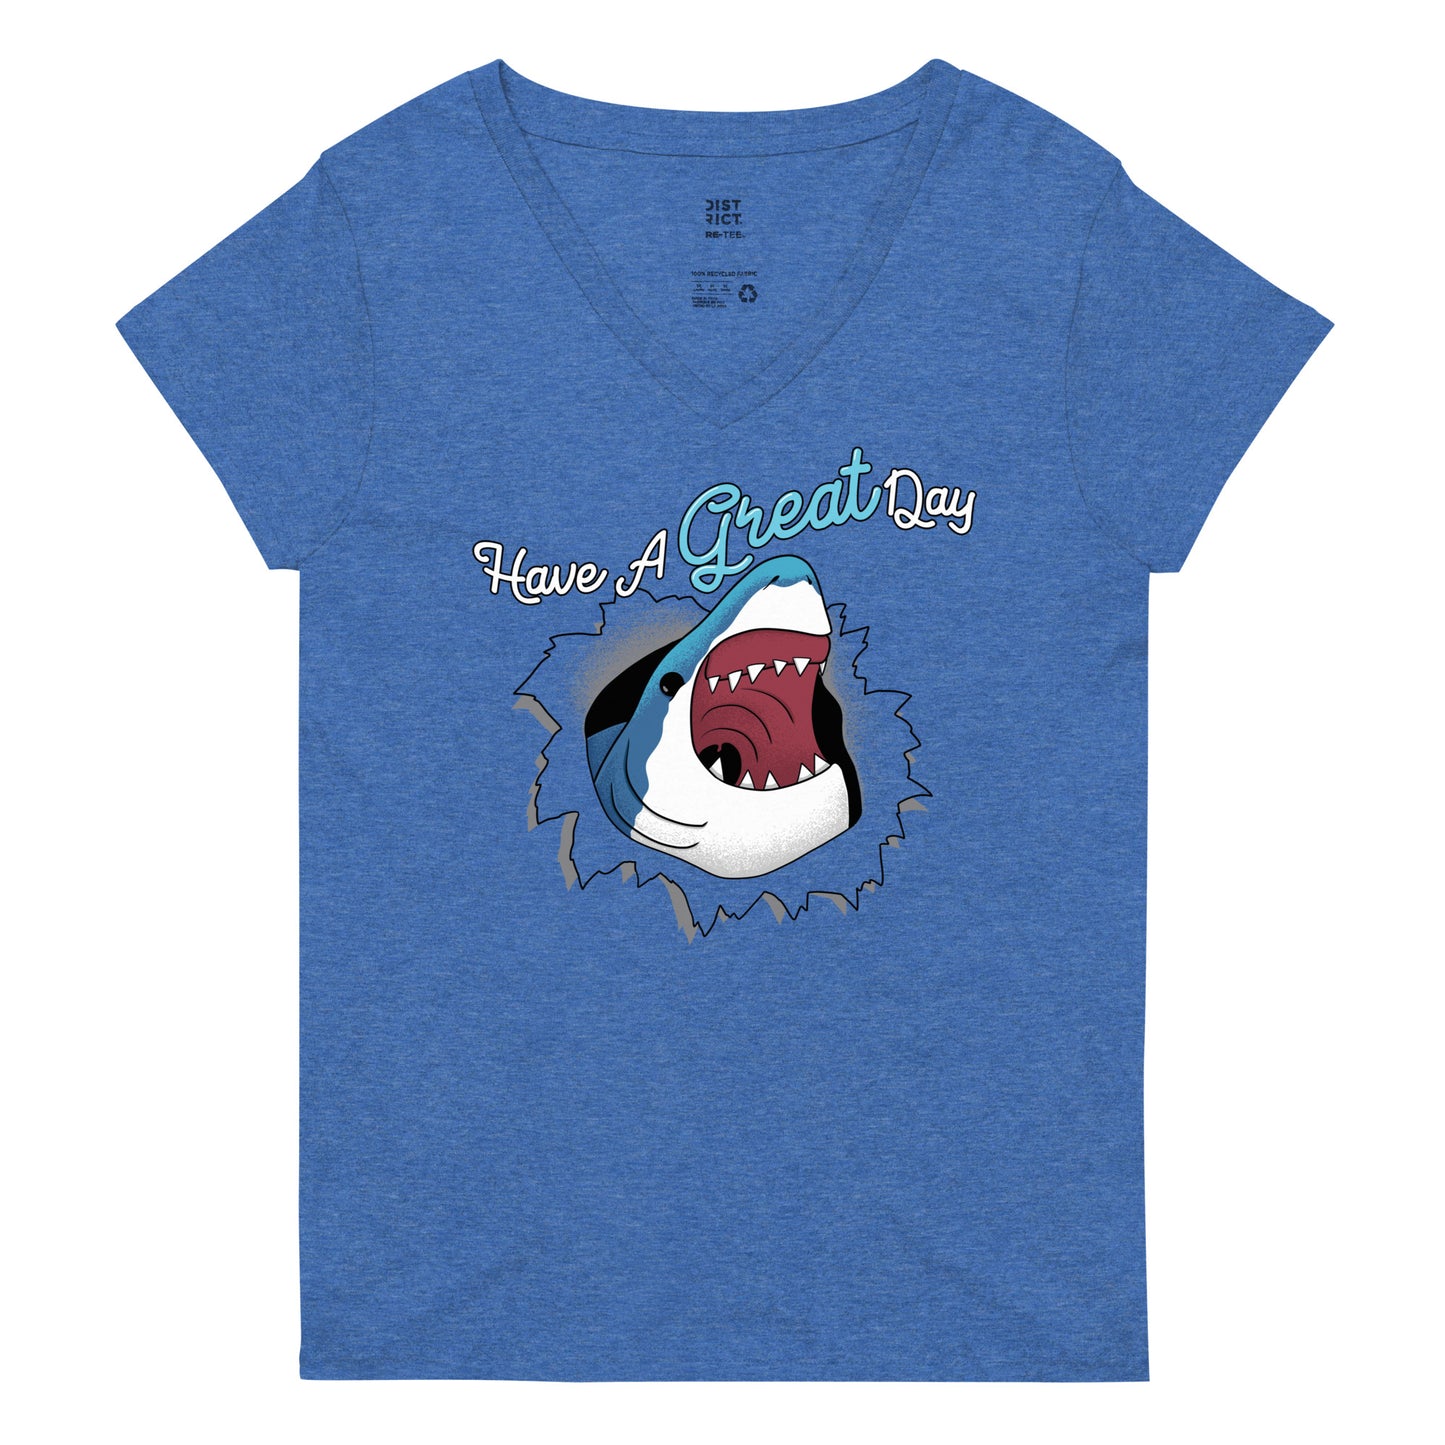 Have A Great Day Women's V-Neck Tee